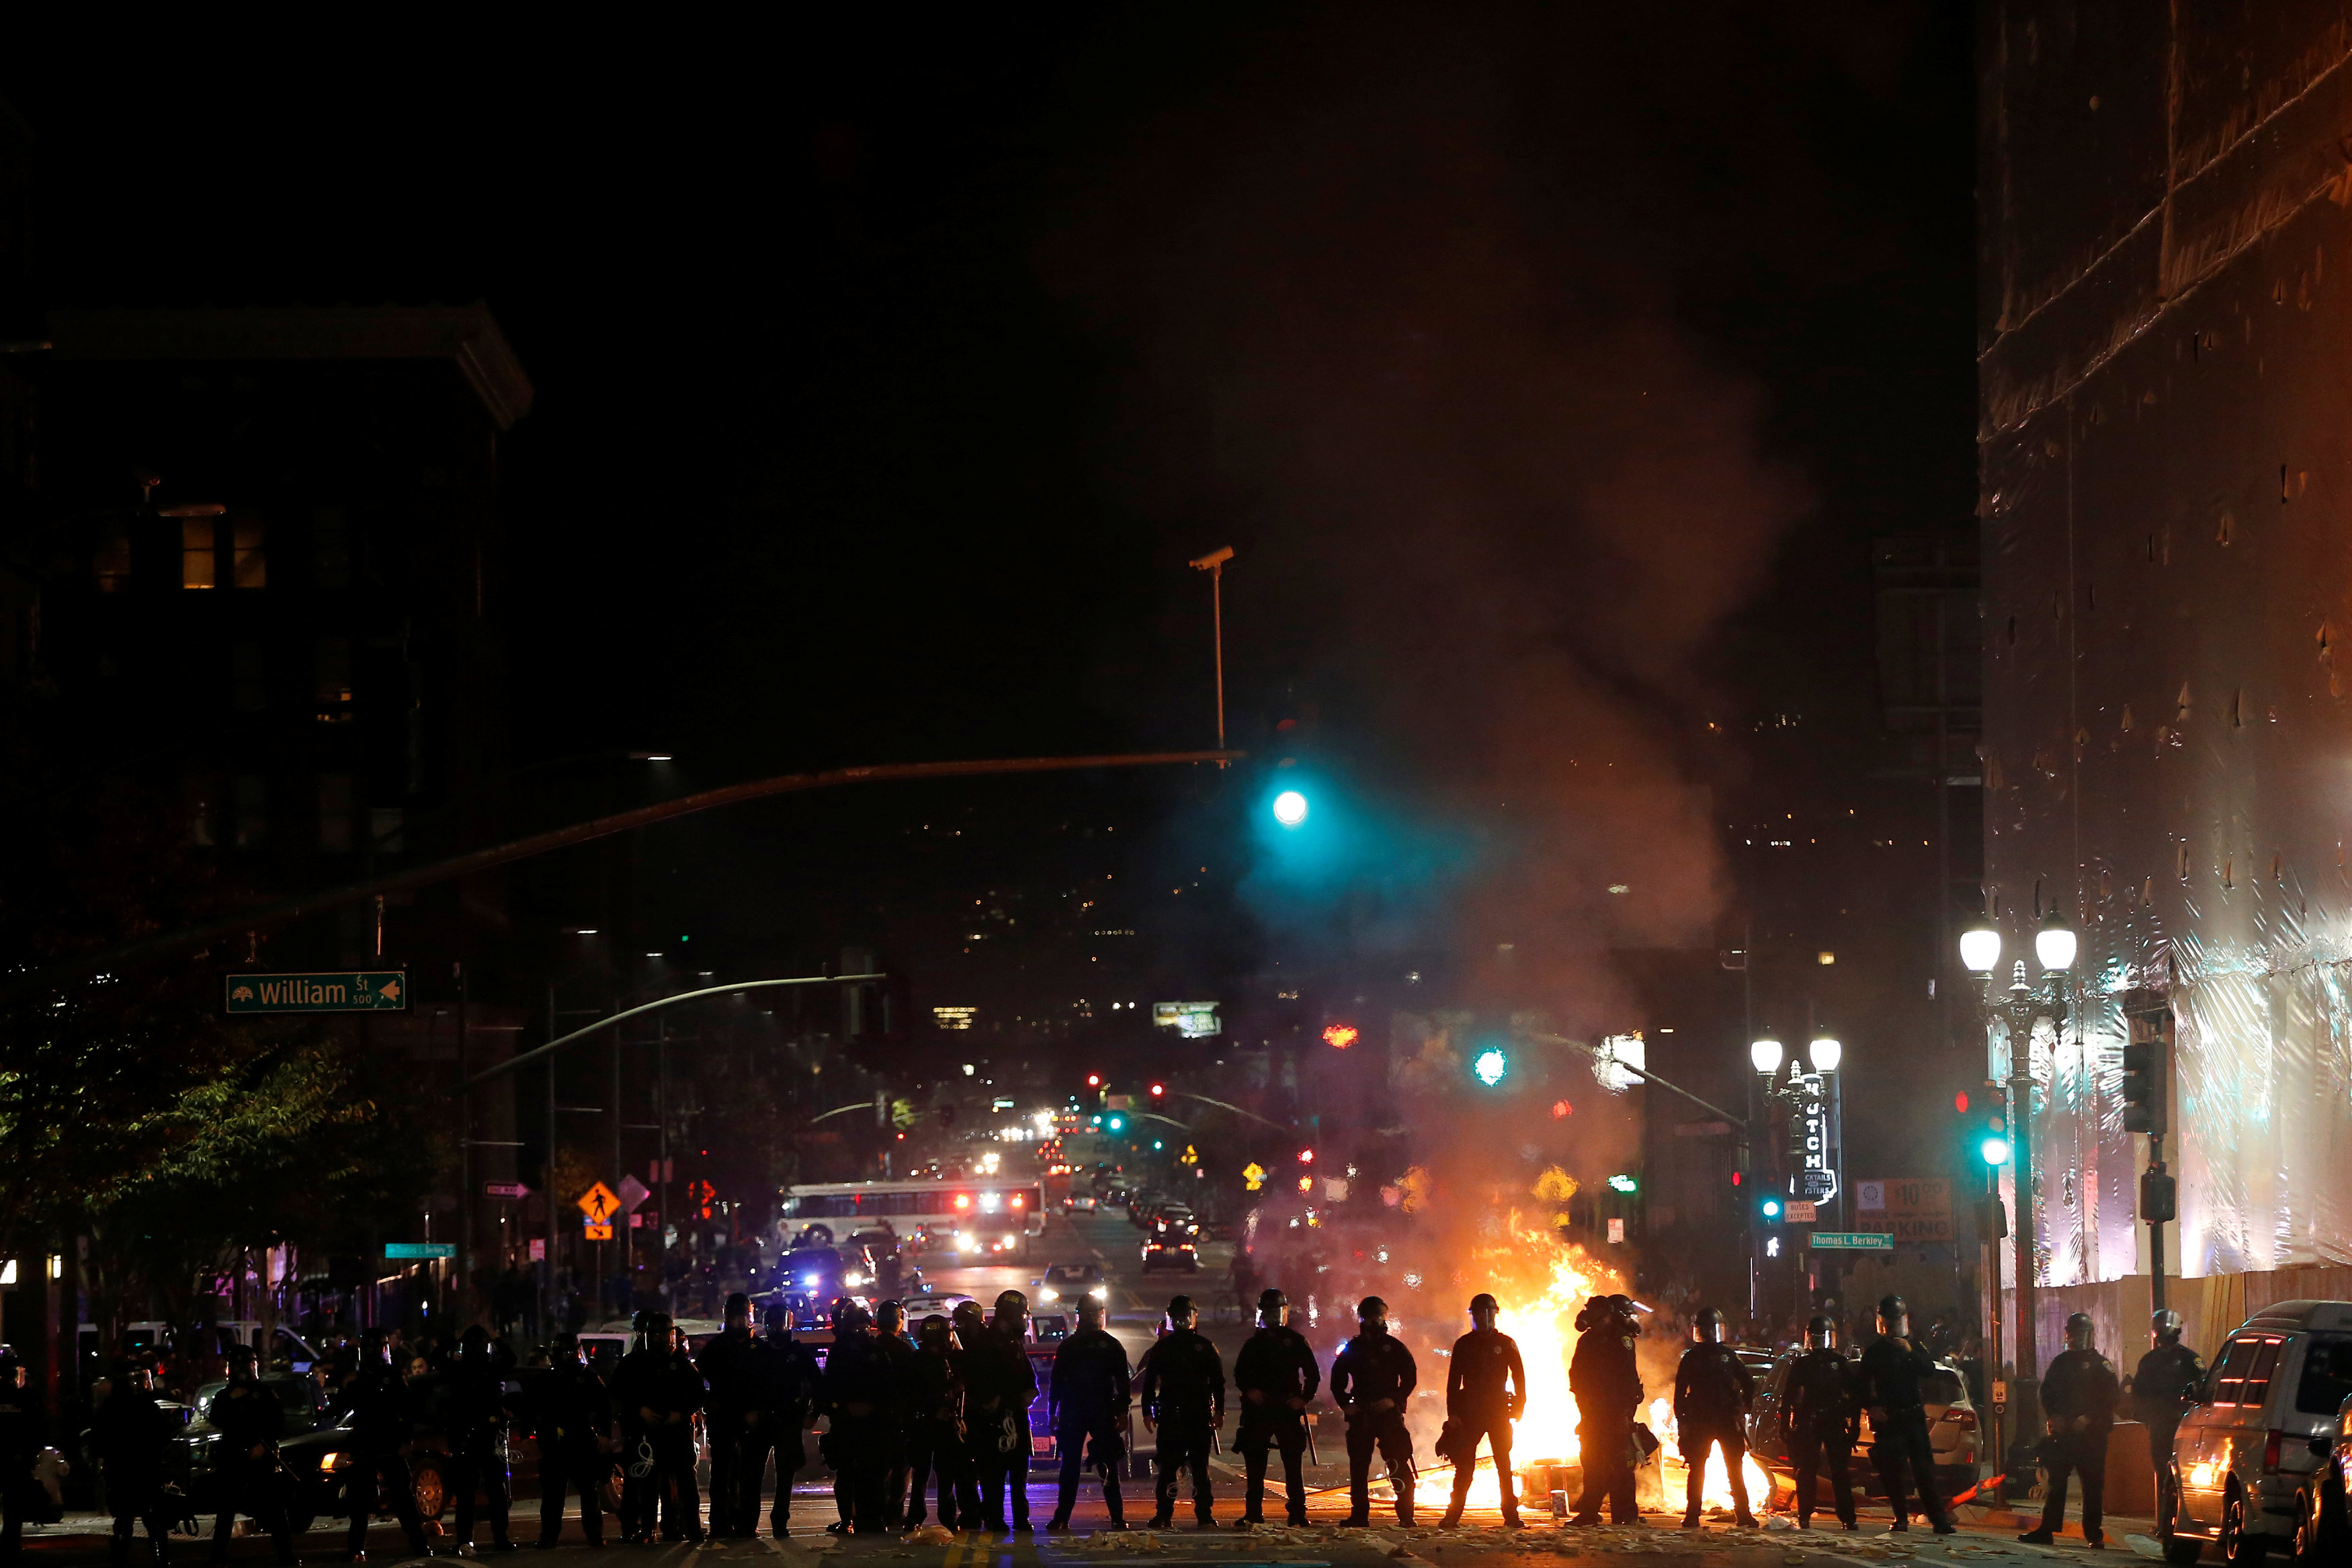 Police officers form a line after demonstrators set a street on fire on Telegraph Avenue in Oakland, California, U.S. following the election of Donald Trump as President of the United States November 9, 2016. REUTERS/Stephen Lam TPX IMAGES OF THE DAYn